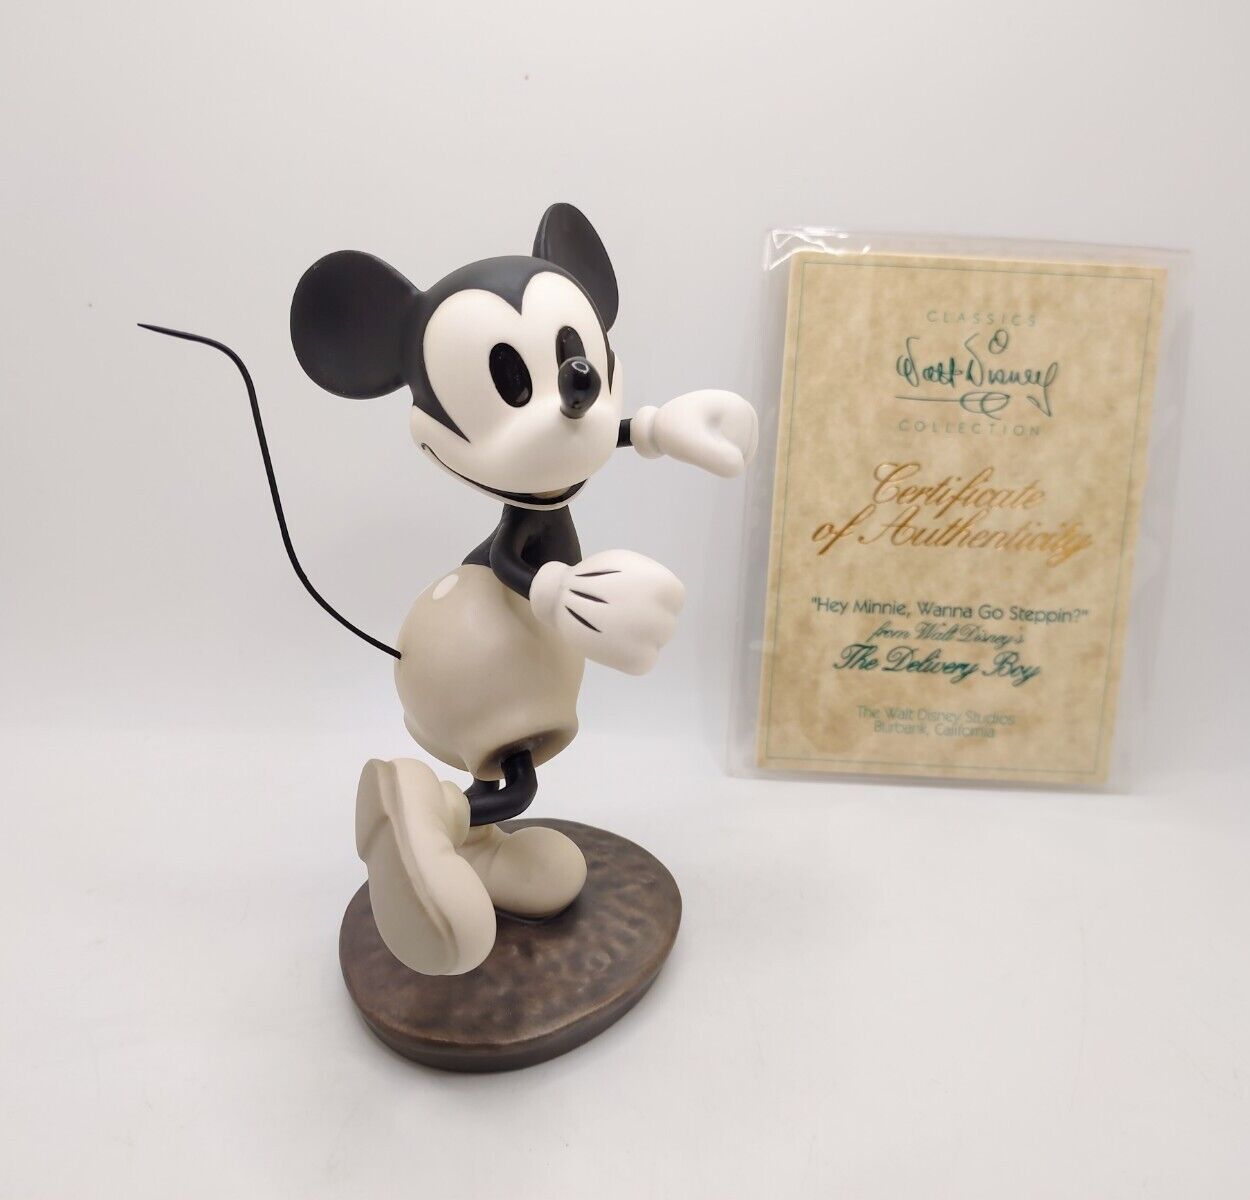 WDCC Mickey Mouse The Delivery Boy Mickey Hey Minnie Wanna Go Steppin? 1993 Clef